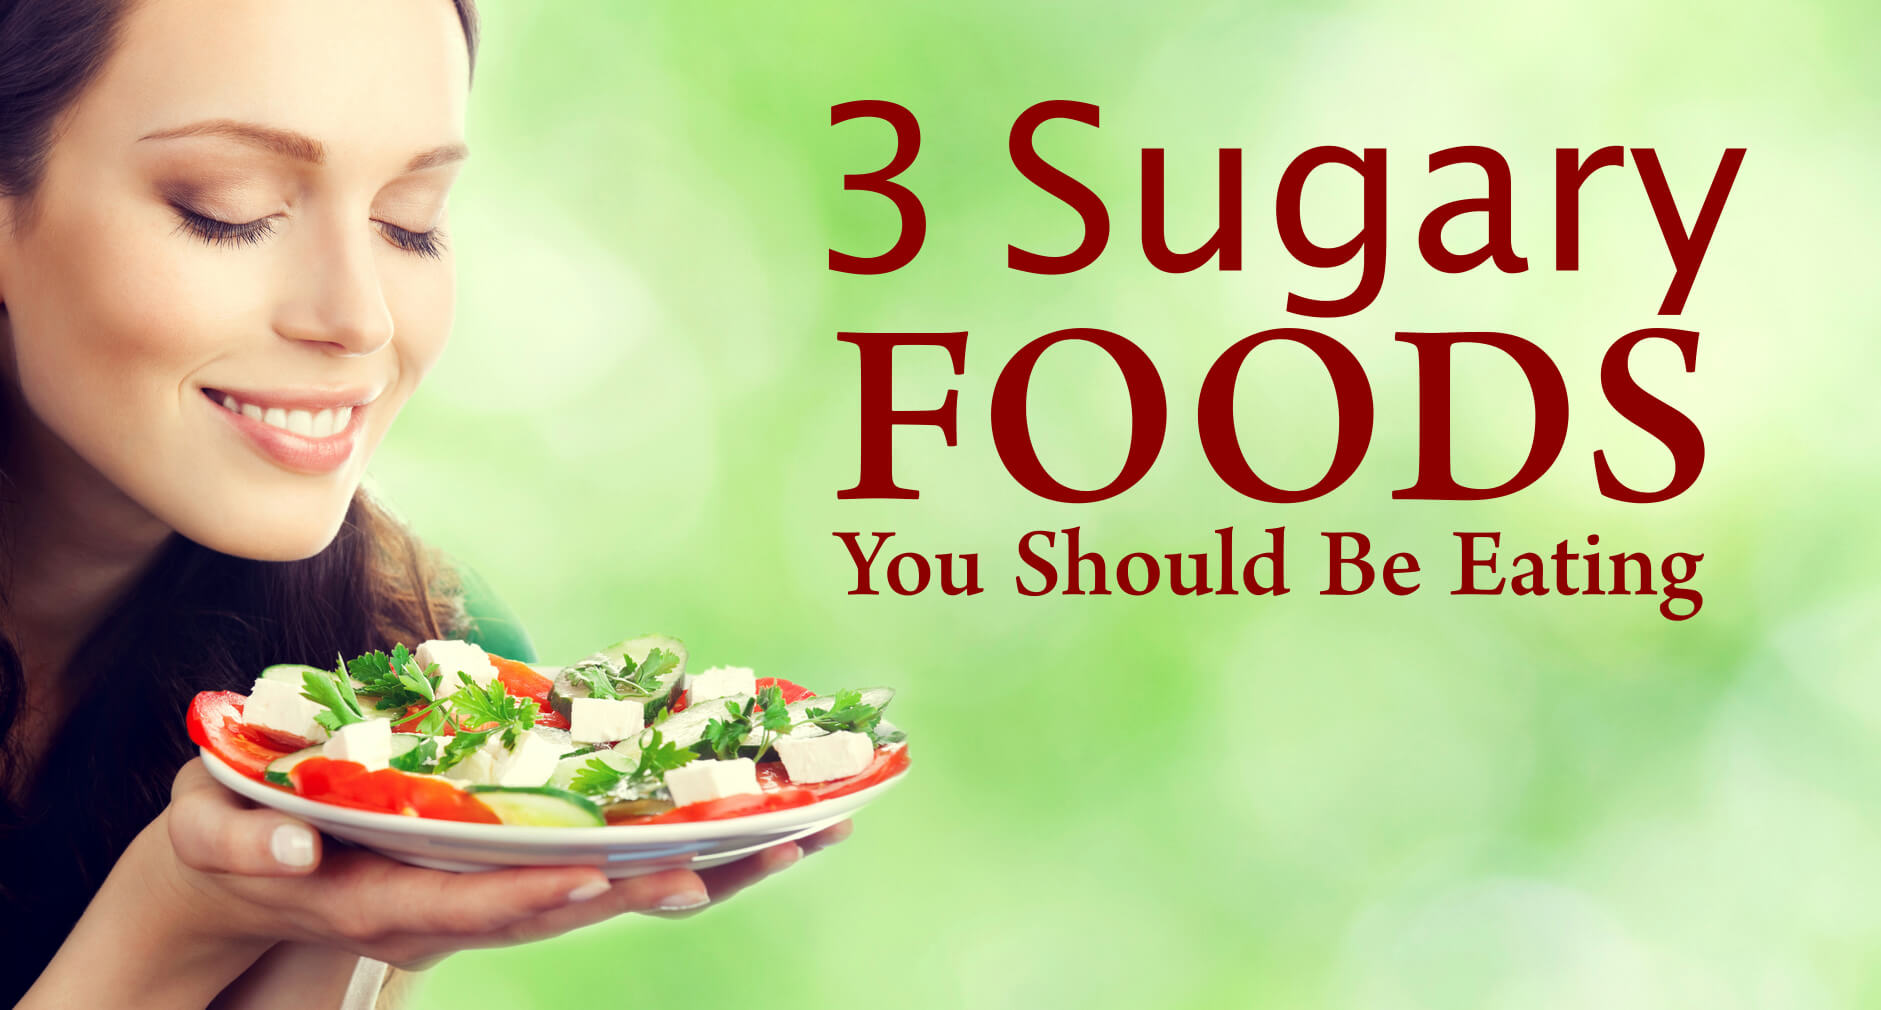 3 Sugary Foods You Should Be Eating